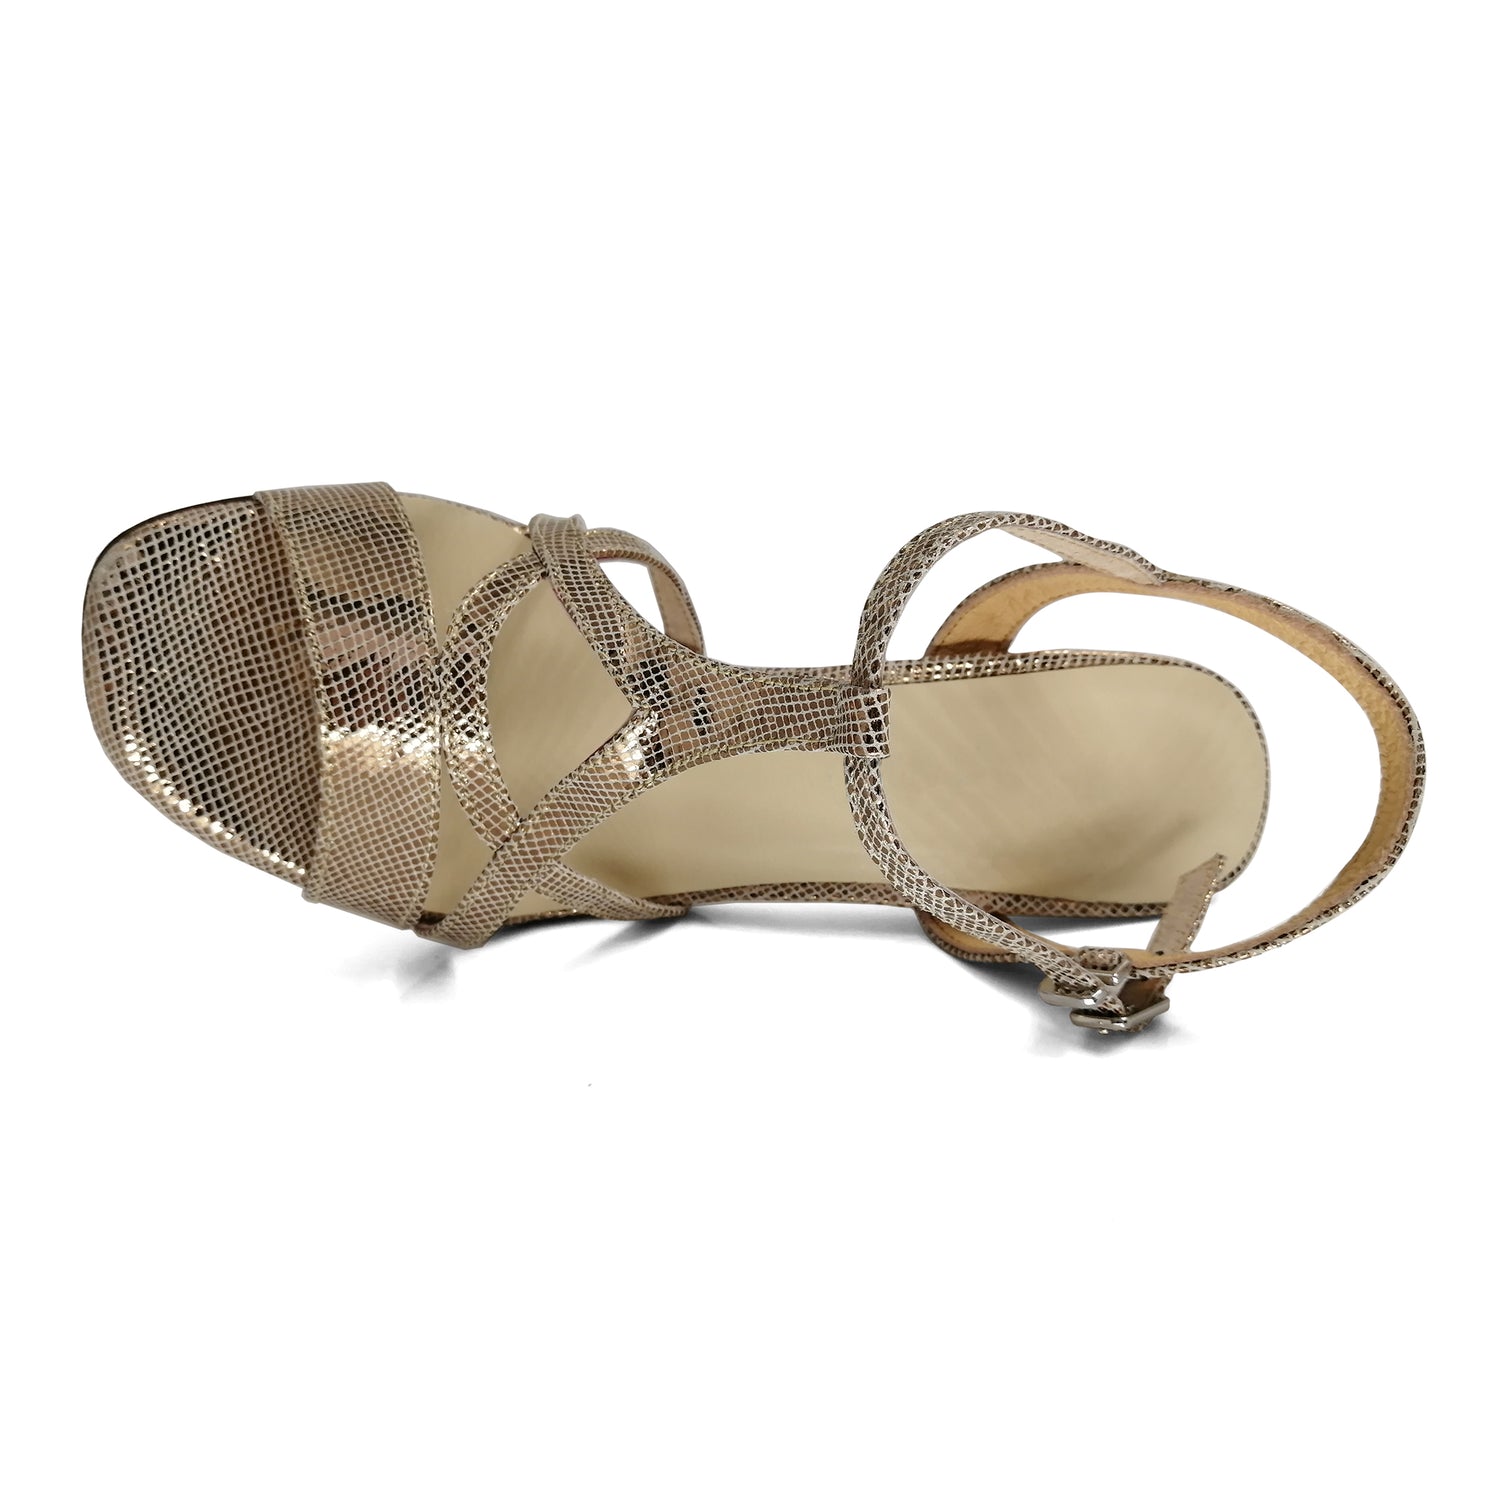 Pro Dancer Argentine Tango Shoes in Rose Gold with High Heels and Leather Sole2